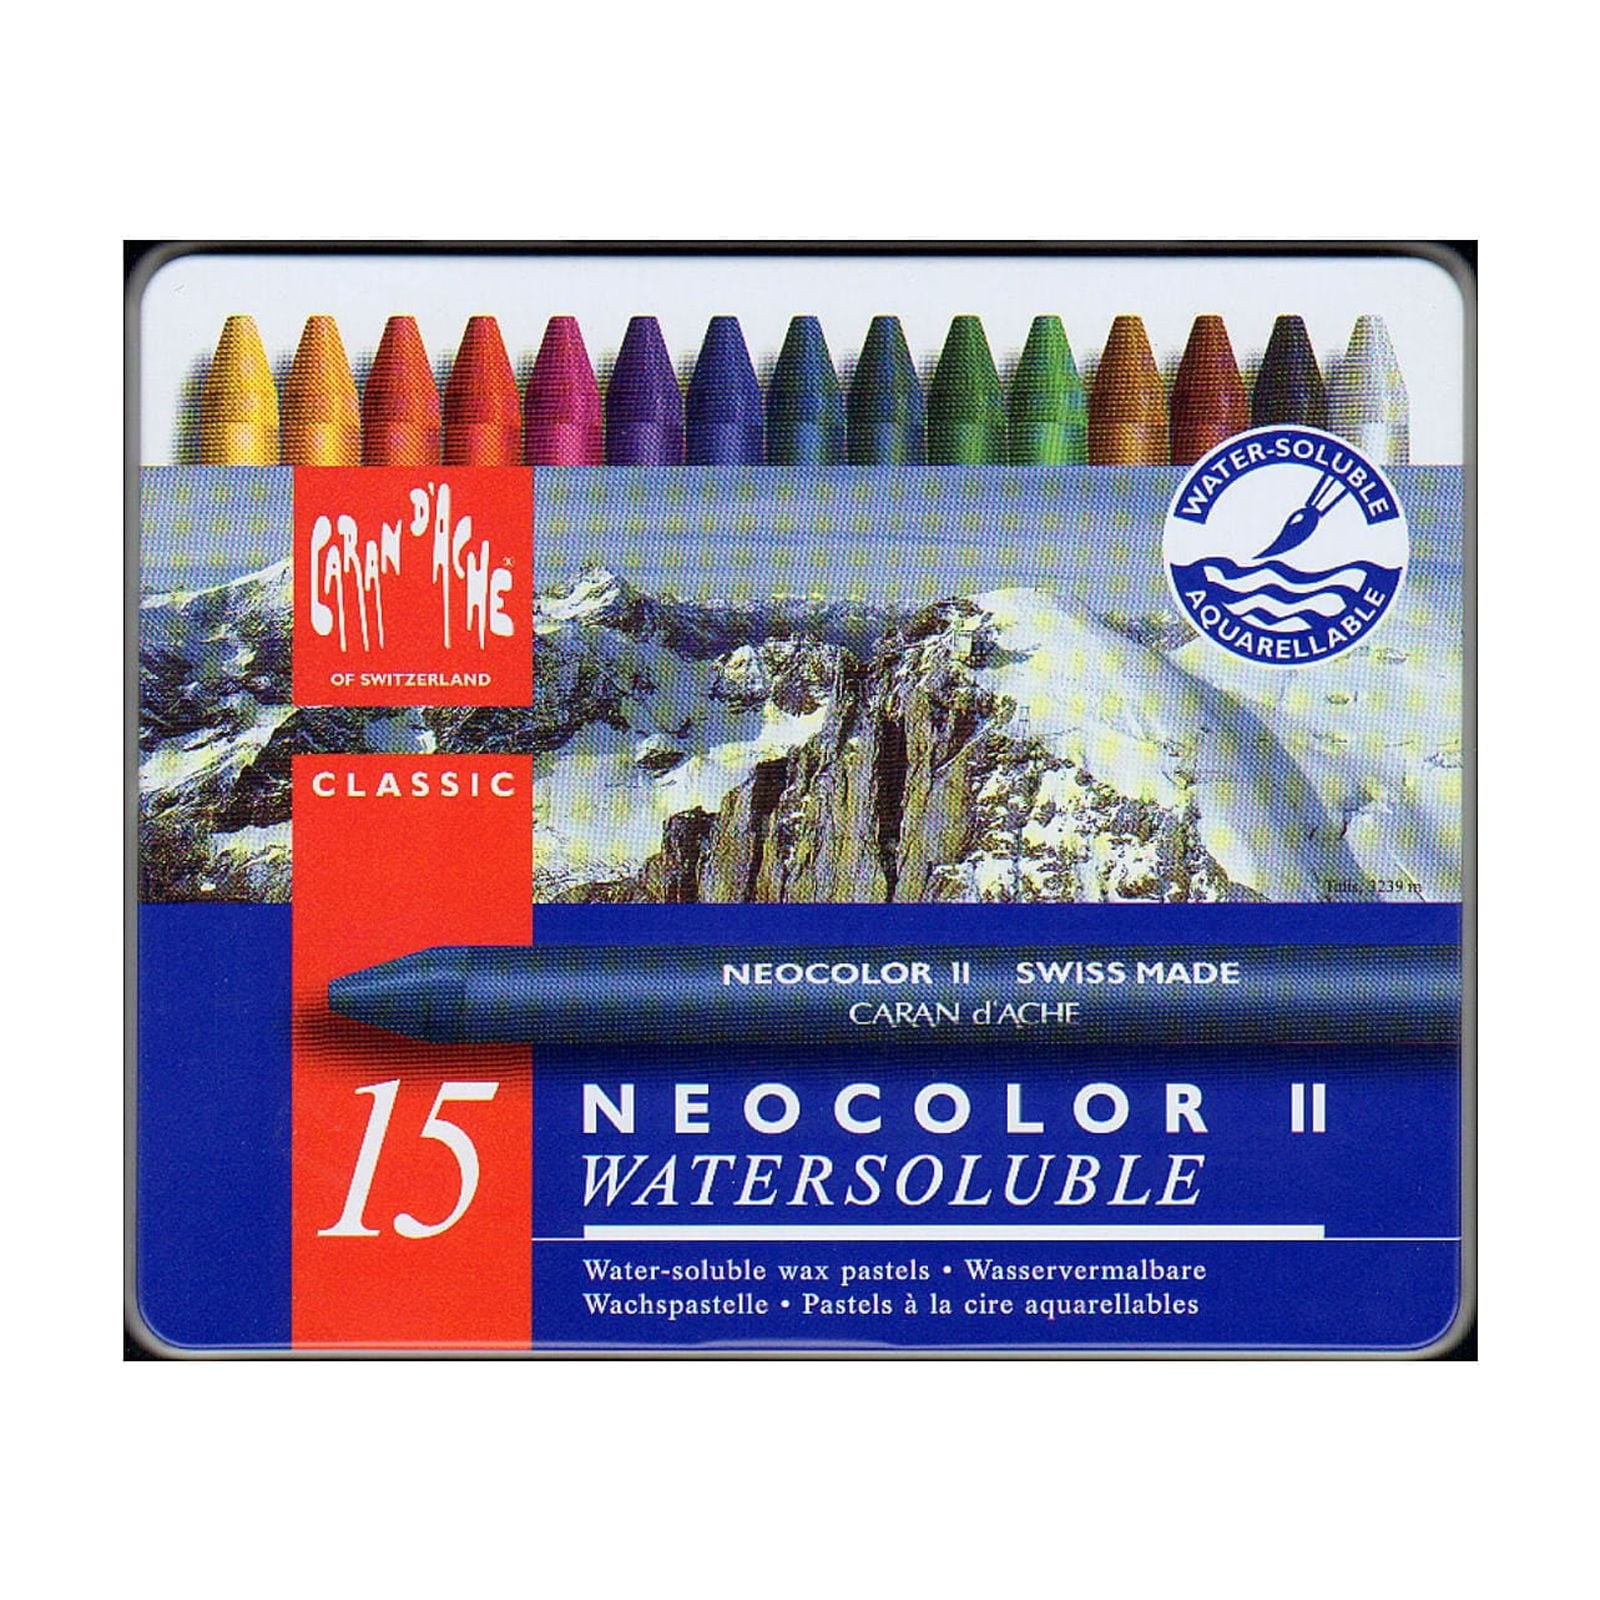 Caran D'Ache NEOCOLOR II Watersoluble Crayon Set of 30 - Art and Frame of  Sarasota